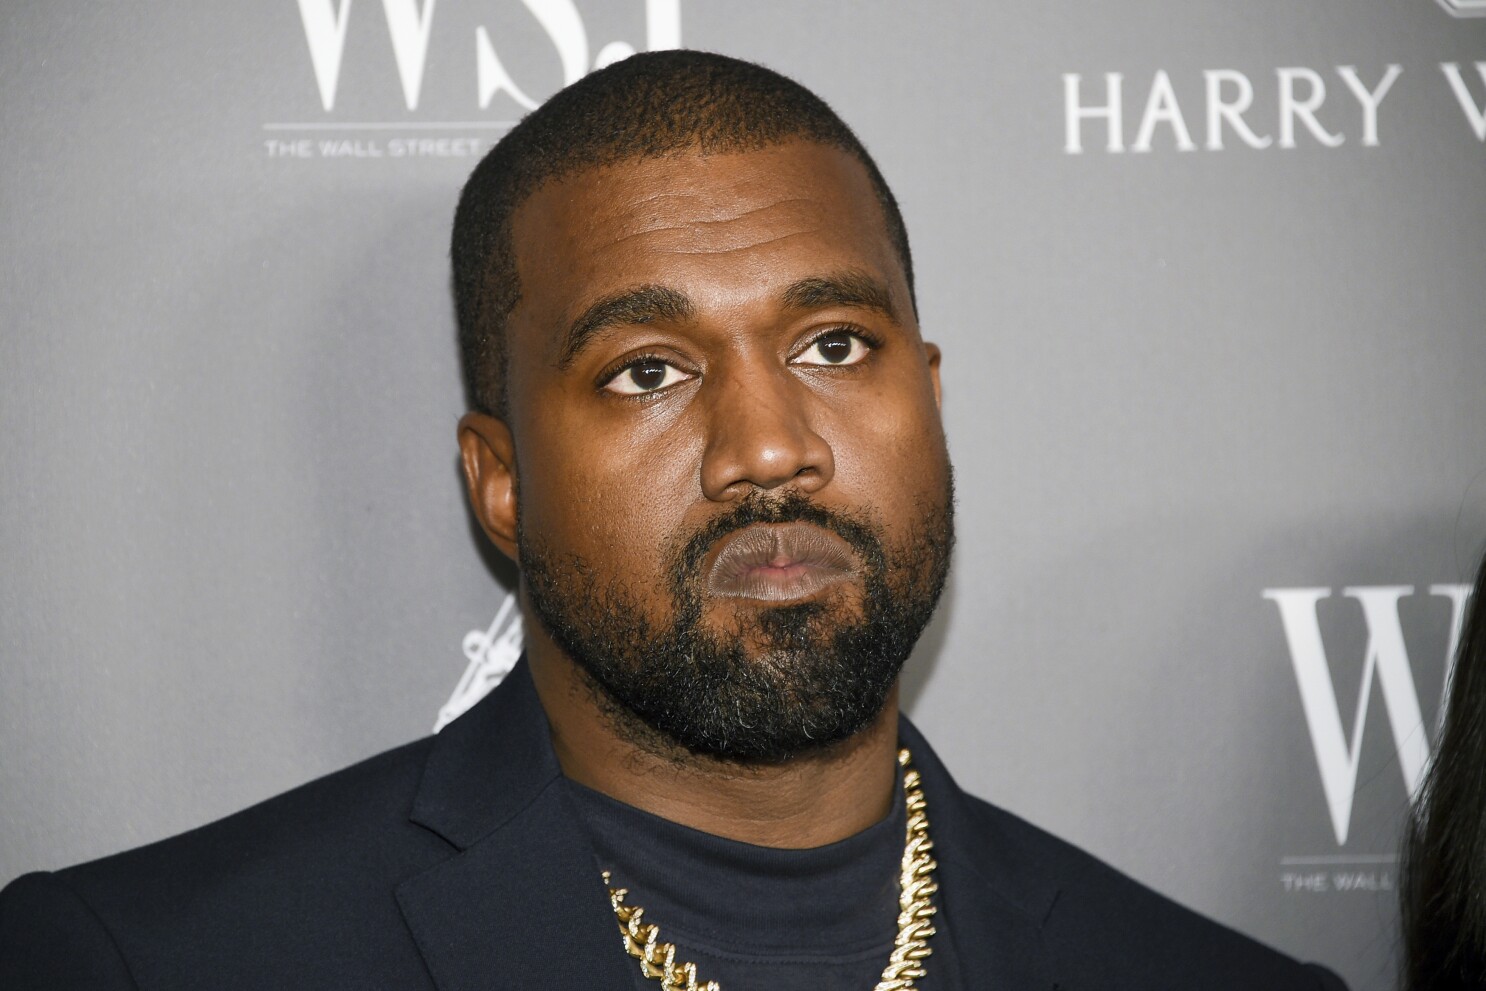 ASSAULT CHARGE DISMISSED AGAINST KANYE WEST IN A FAN-PUNCHING INCIDENT OUTSIDE A HOLLYWOOD HOTEL